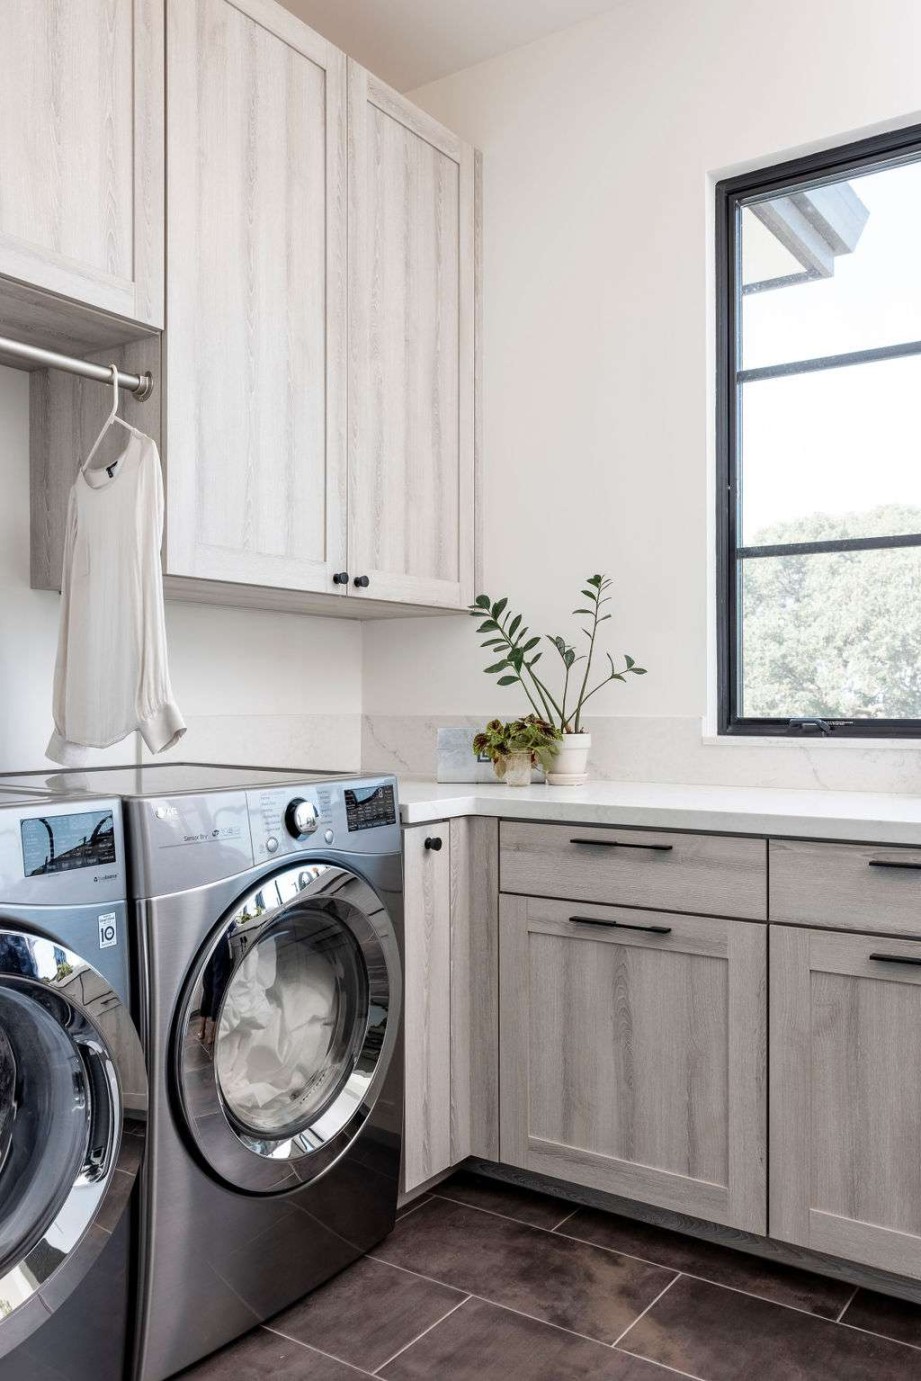 Laundry Room Ideas to Make This Space a Joy